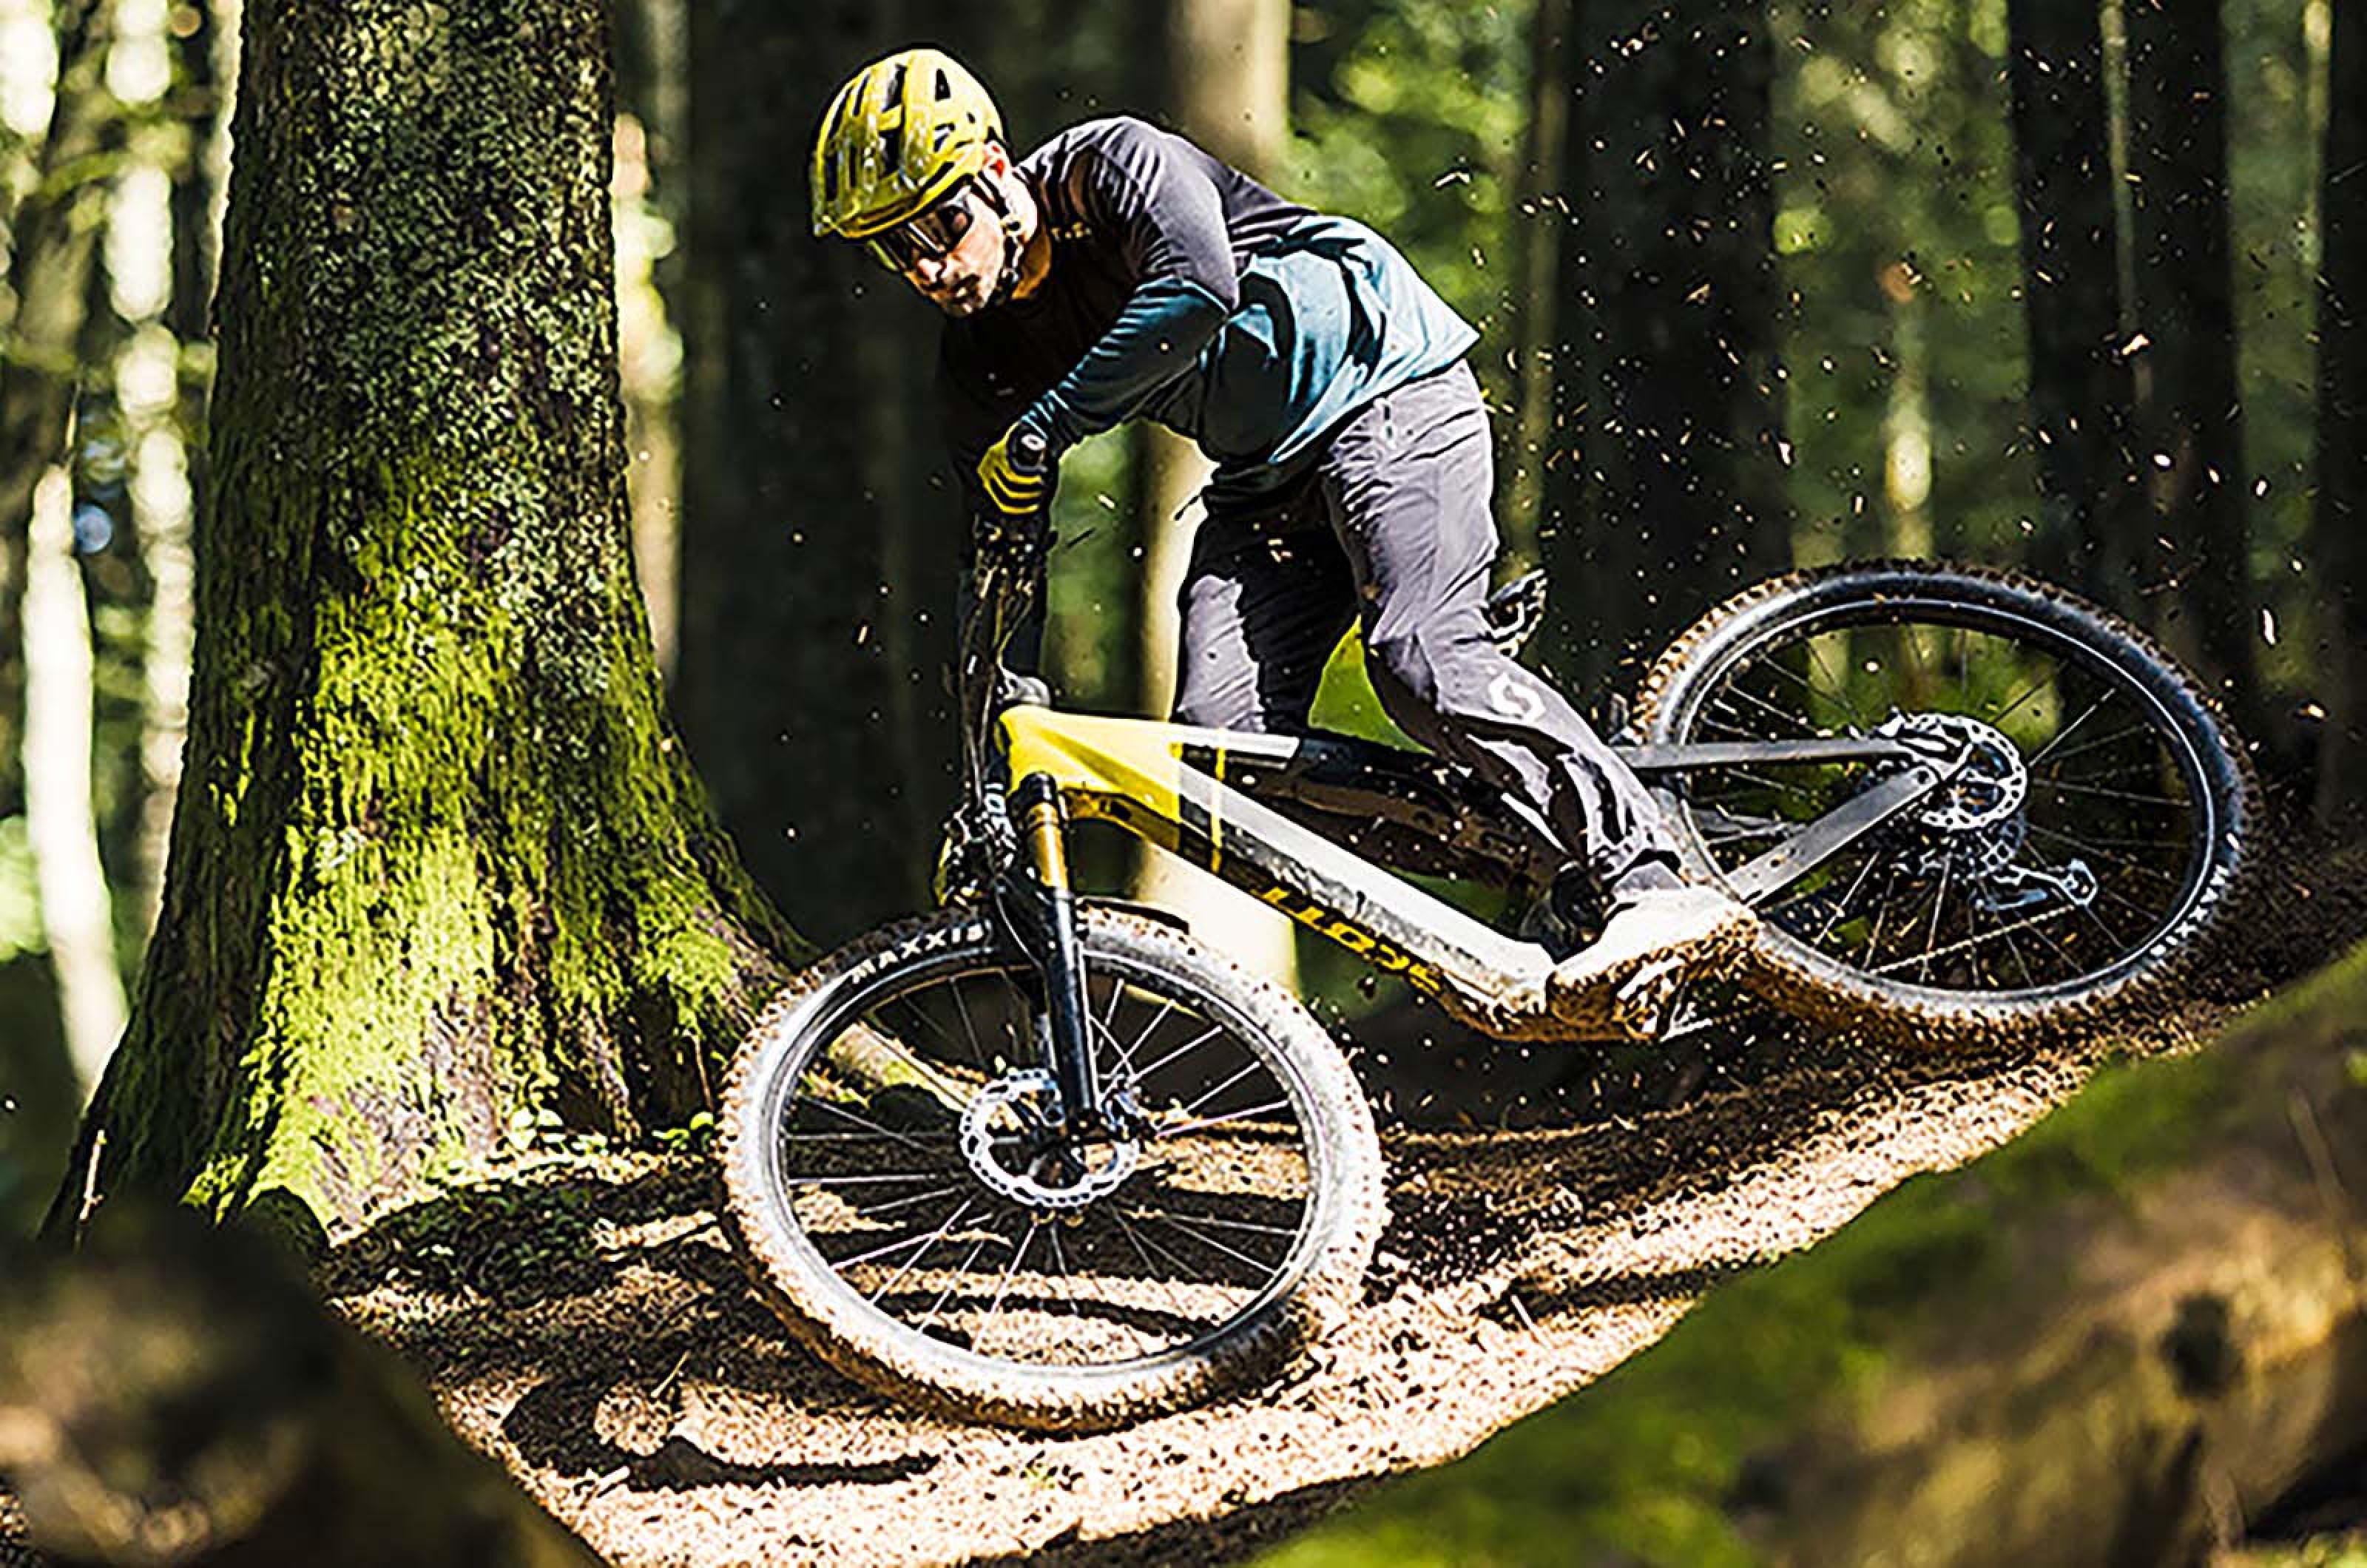 <p>The Scott Patron E-Ride 900 Tuned is one of the best looking eMTBs on the market. It’s designed for all-day trail riding, with a carefully tuned balance between controlled and fast descending and agile handling for climbing.</p>  <p>It’s powered by Bosch’s Gen4 Performance CX mid-drive motor and a 750Wh PowerTube for plenty of range. You also get a 12-speed SRAM X01 Eagle drivetrain and 160mm FOX 38 Float Factory Air forks up front to add to the high-quality componentry.</p>